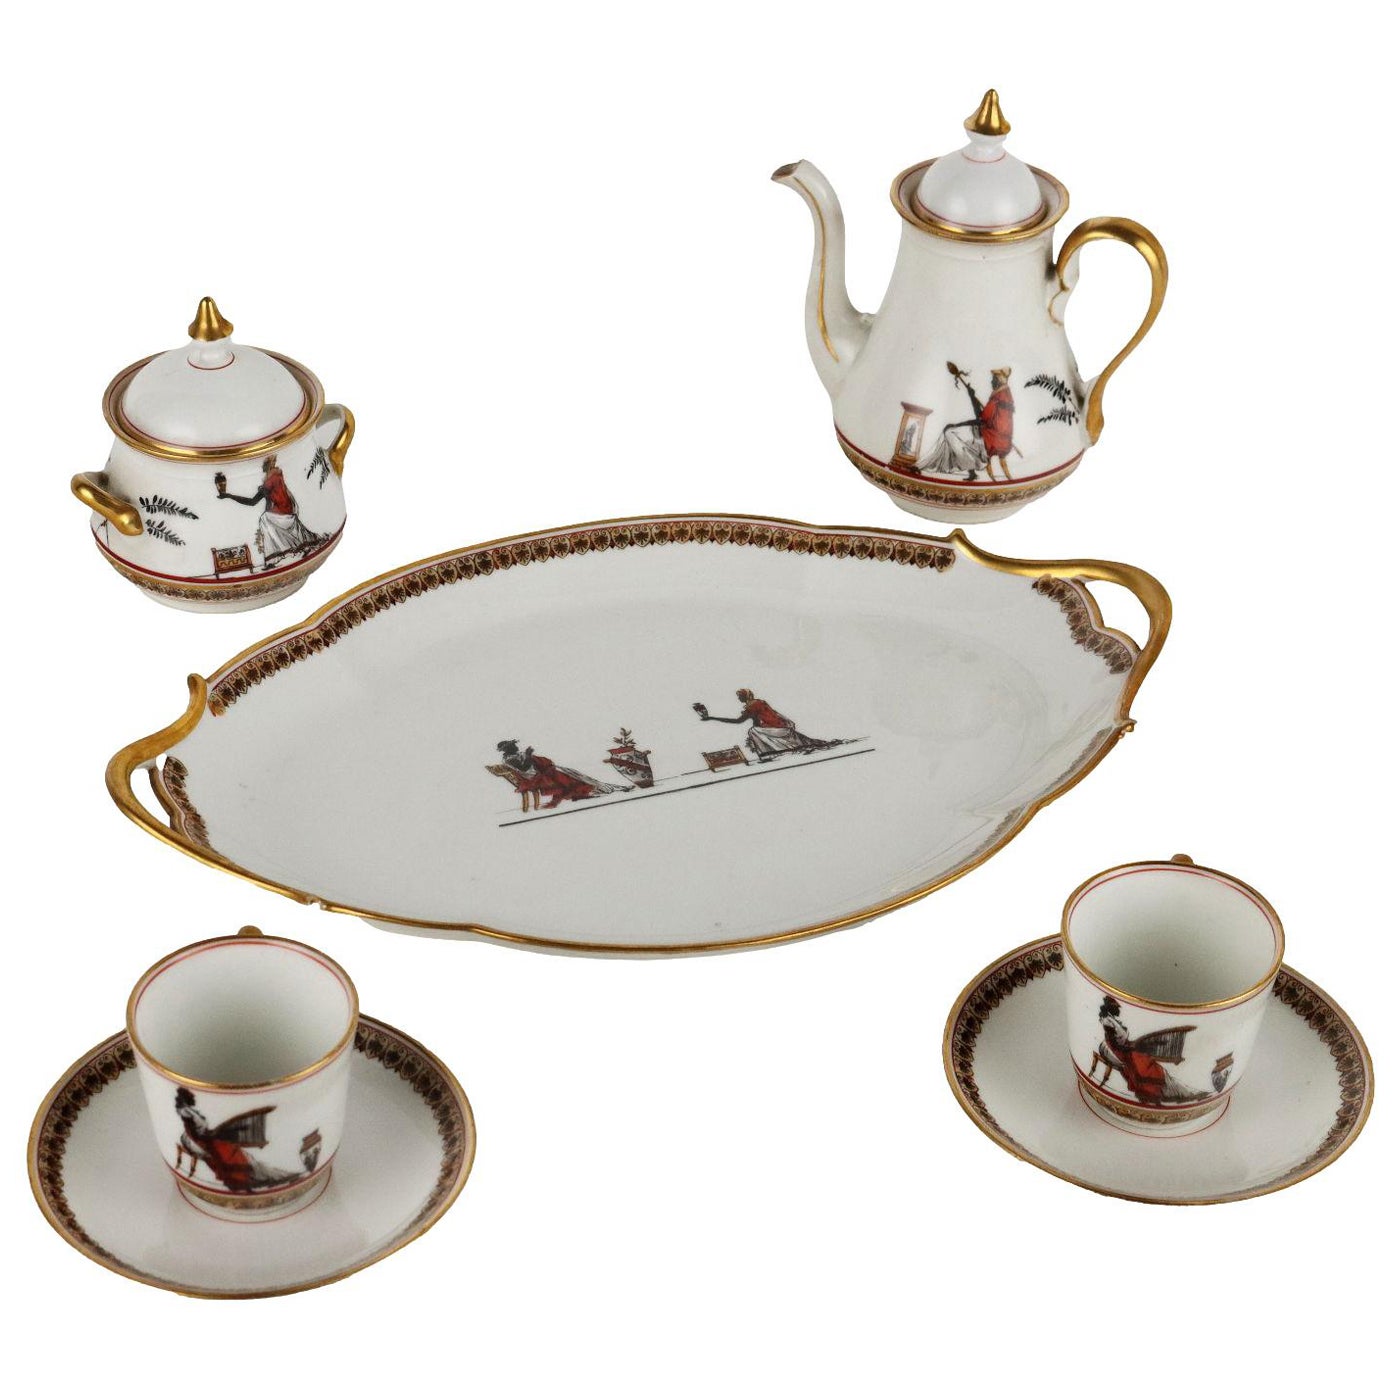 Tete a Tete service in Porcelain by Ginori - Italy ca. 1880. For Sale